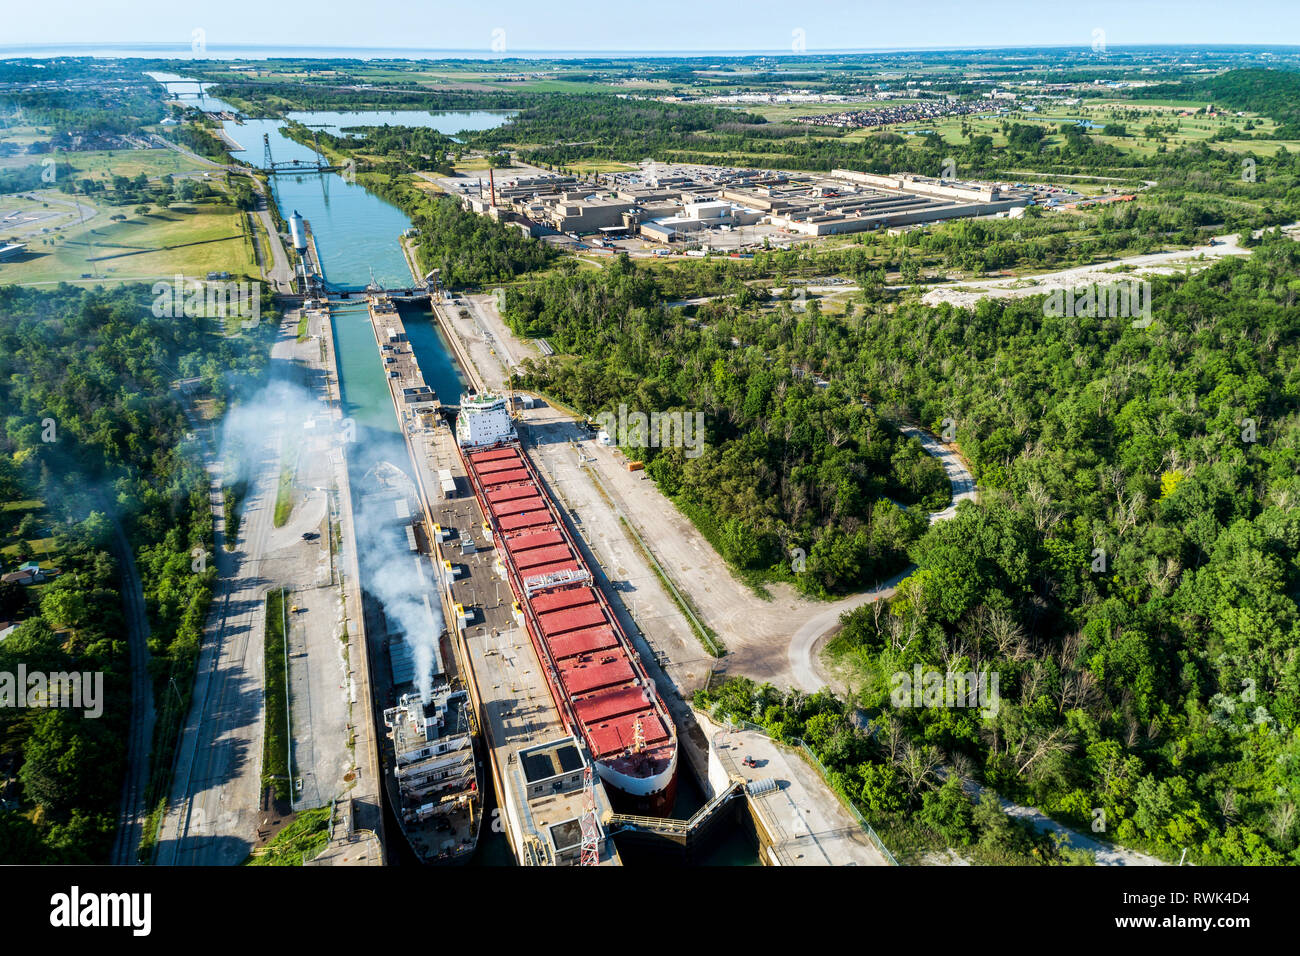 Aerial view of two large laker ships in a canal's lock system; Thorold, Ontario, Canada Stock Photo